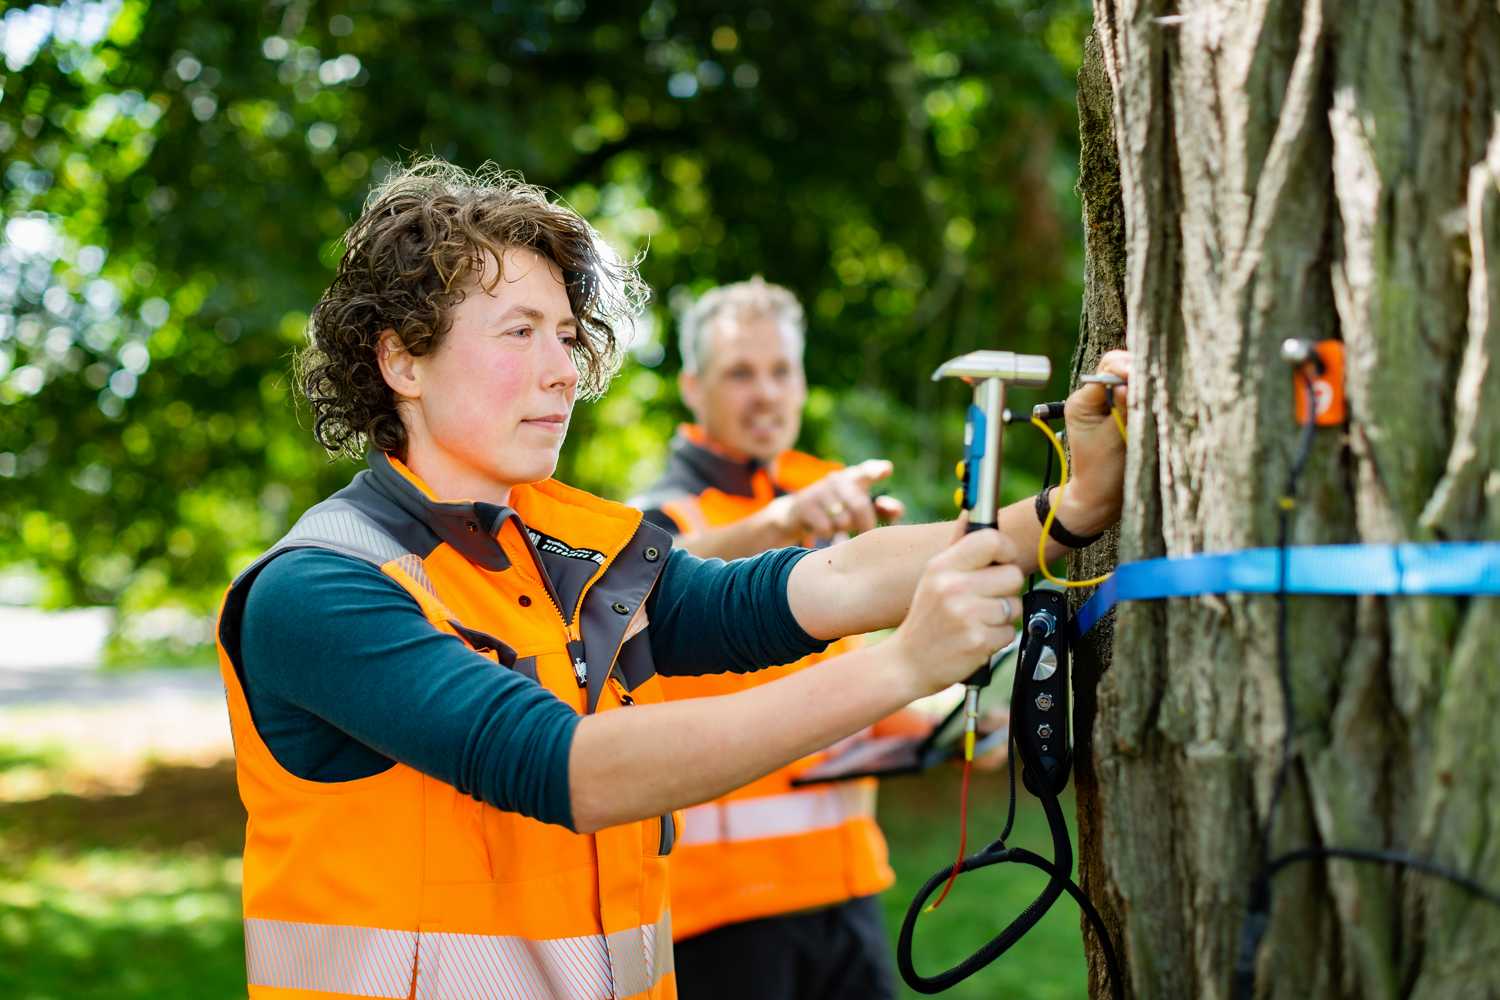 . Our tree technicians inspect trees to investigate their safety, examine monumental trees 